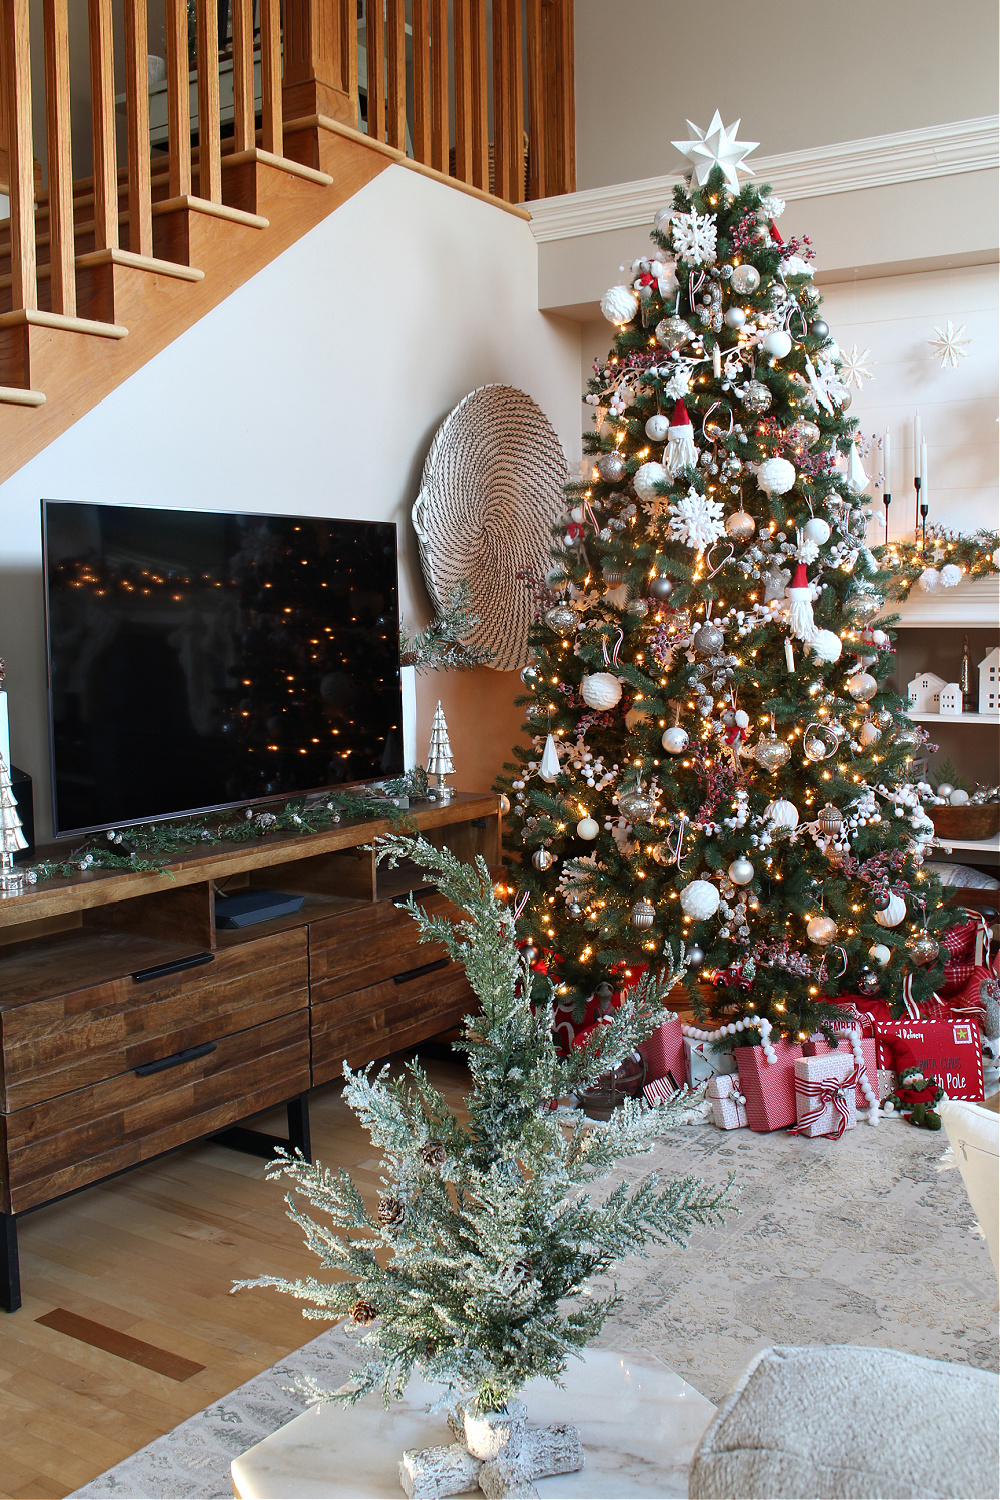 Television stand and Christmas tree in a festive Christmas living room.